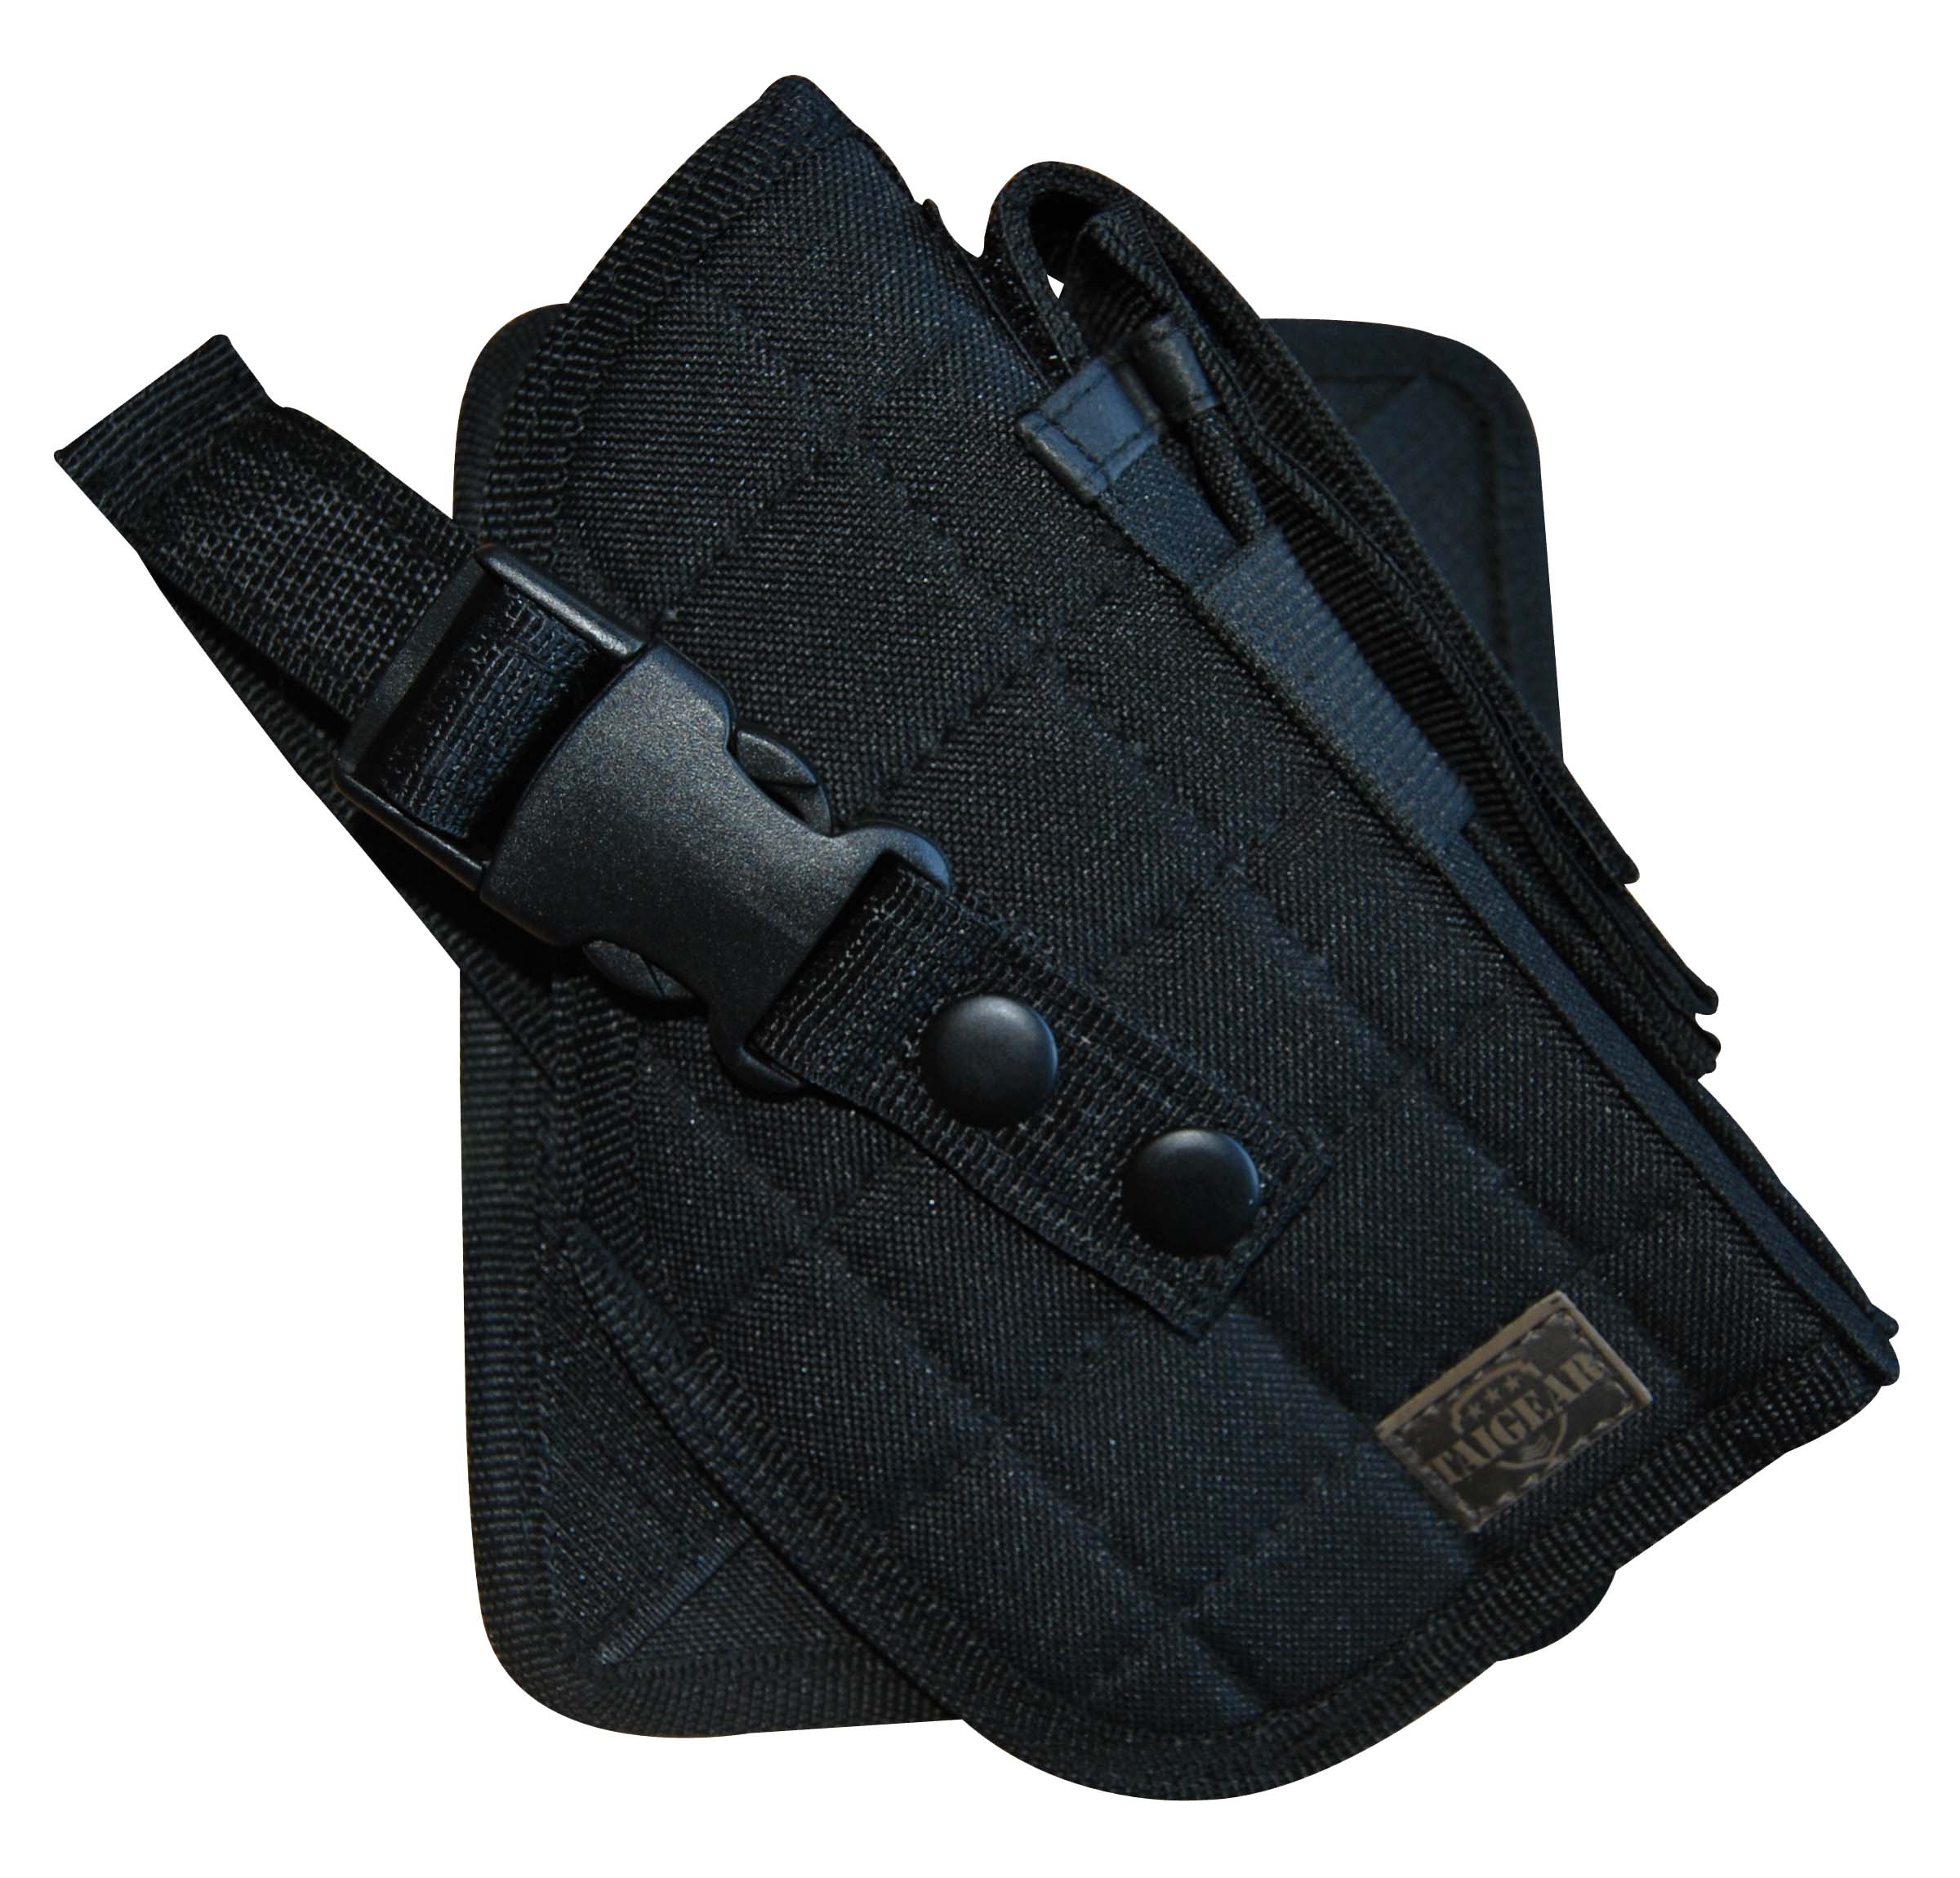 TAIGEAR MOLLE BLACK LARGE AMBIDEXTROUS BELT HOLSTER NICE ITEM FOR PROTECTION 